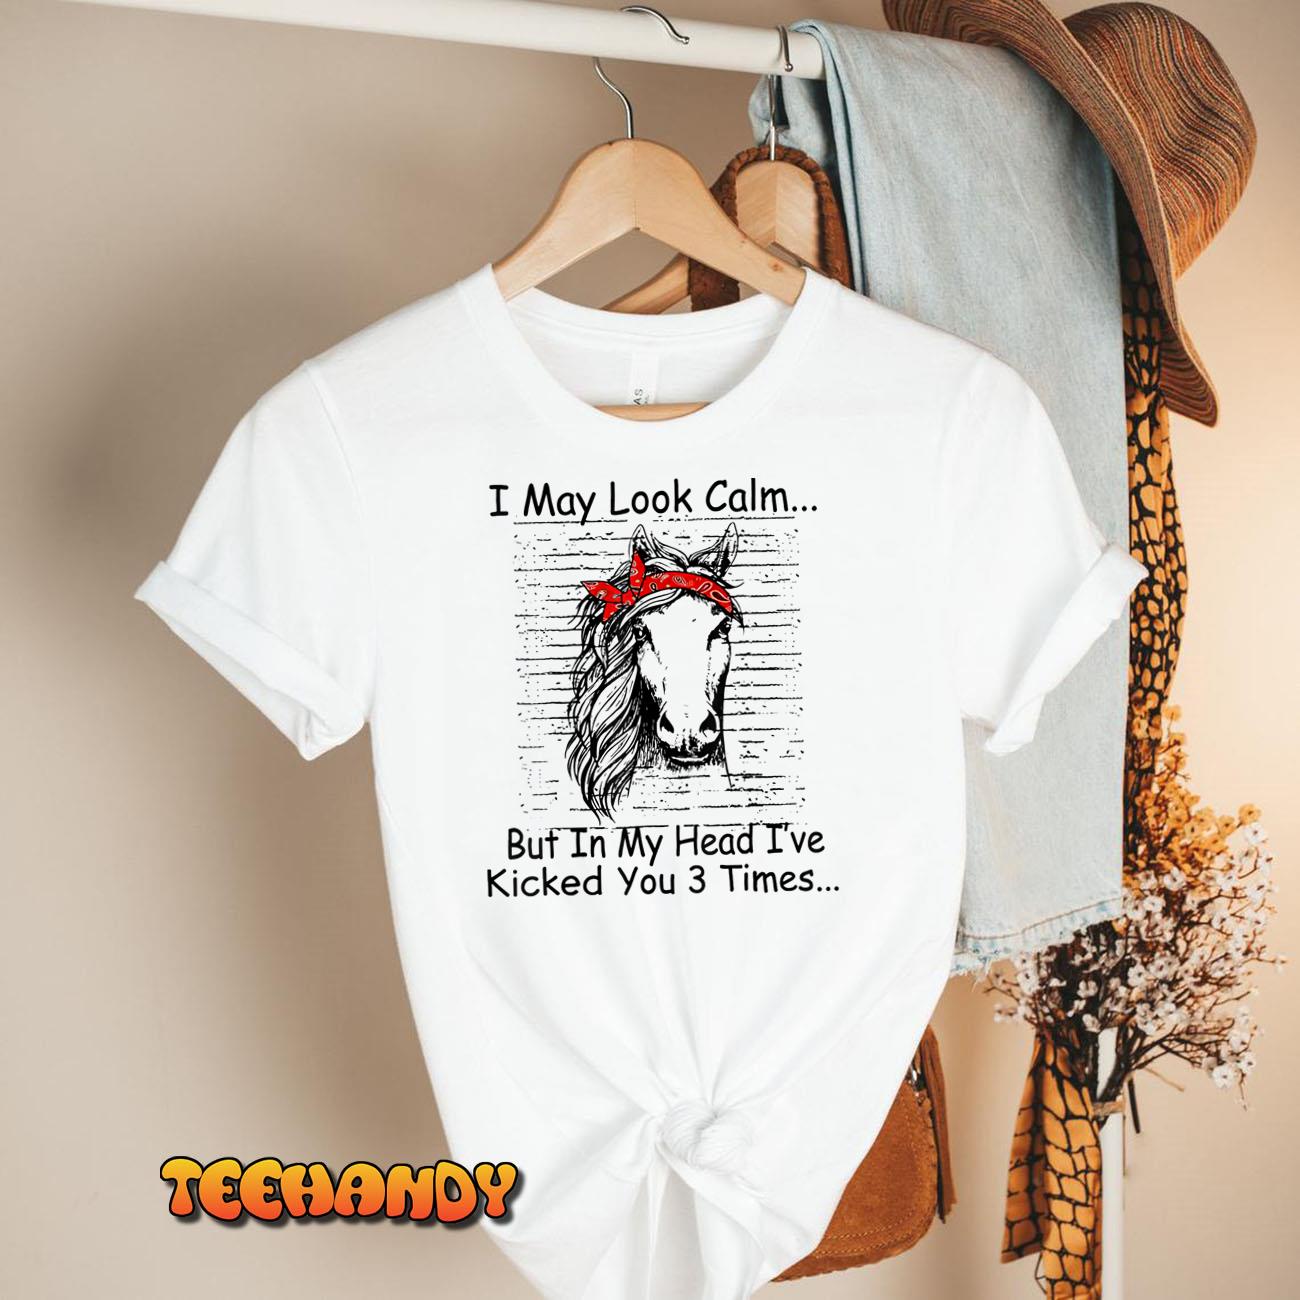 I May Look Calm But In My Head I’ve Kicked You 3 Times T-Shirt